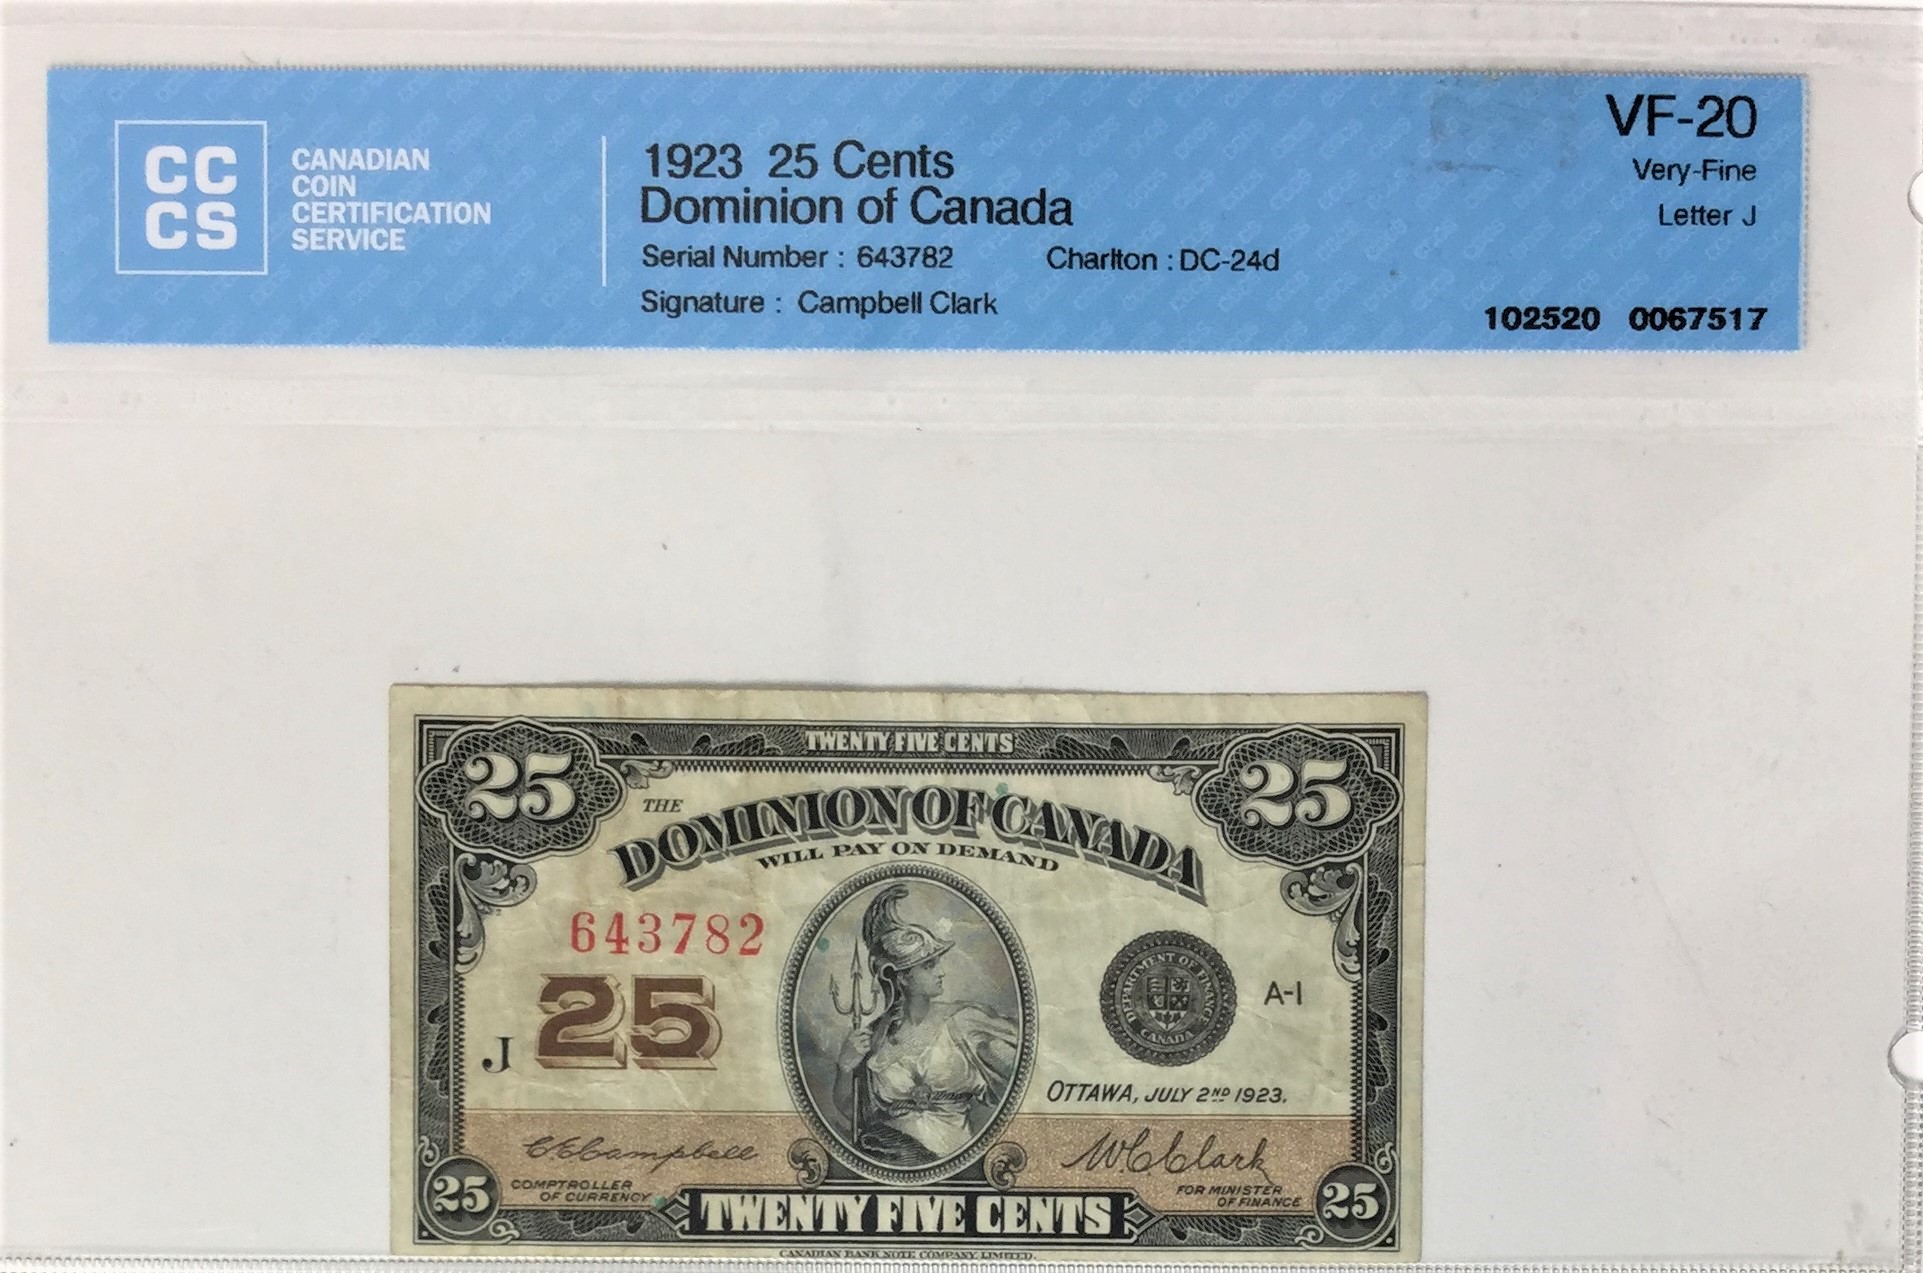 1923 Dominion Of Canada 25 Cents, DC-24d - CCCS Graded VF 20 serial 643782